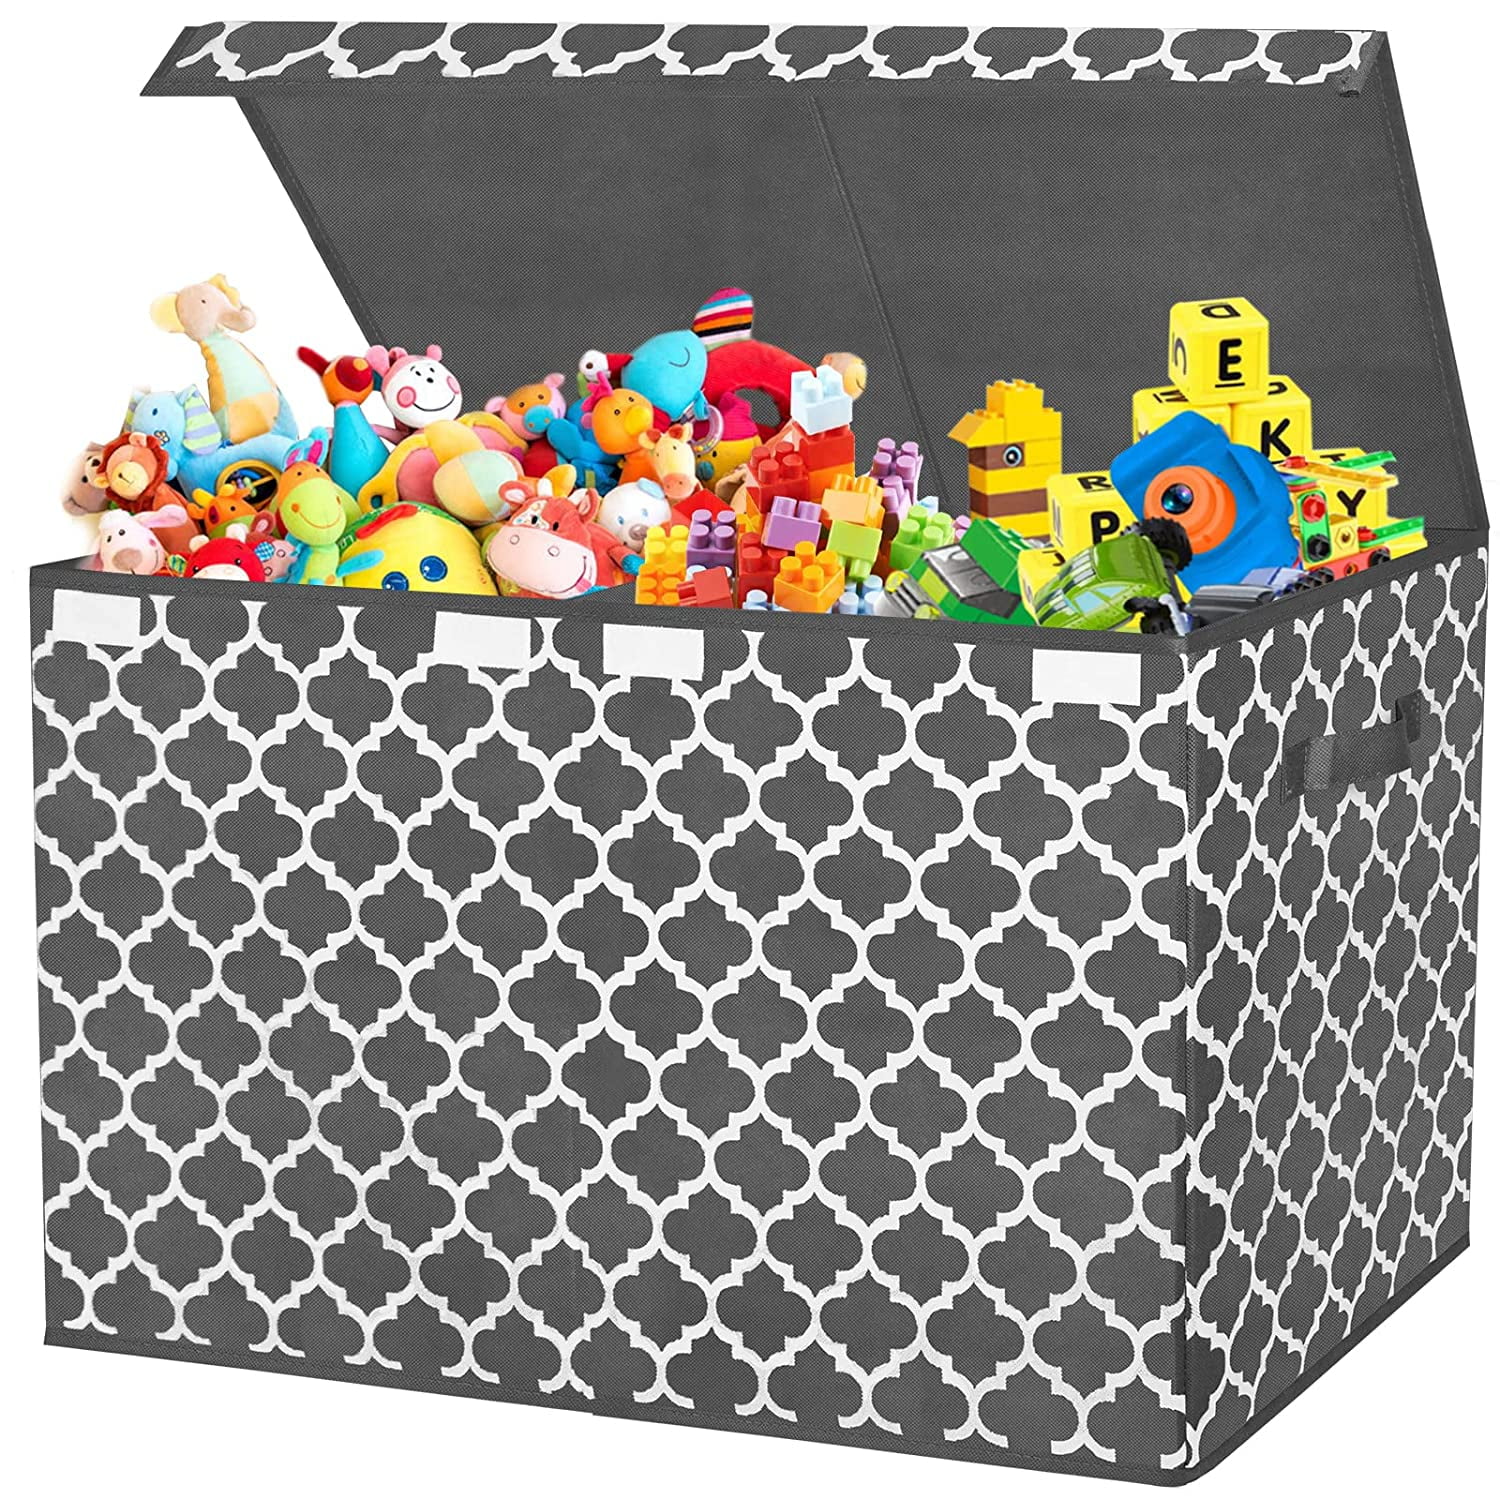 popoly Large Toy Box Chest Storage with Flip-Top Lid, Collapsible Kids  Storage Boxes Container Bins for Childrens Toys, Playroom Organizers,  25x13